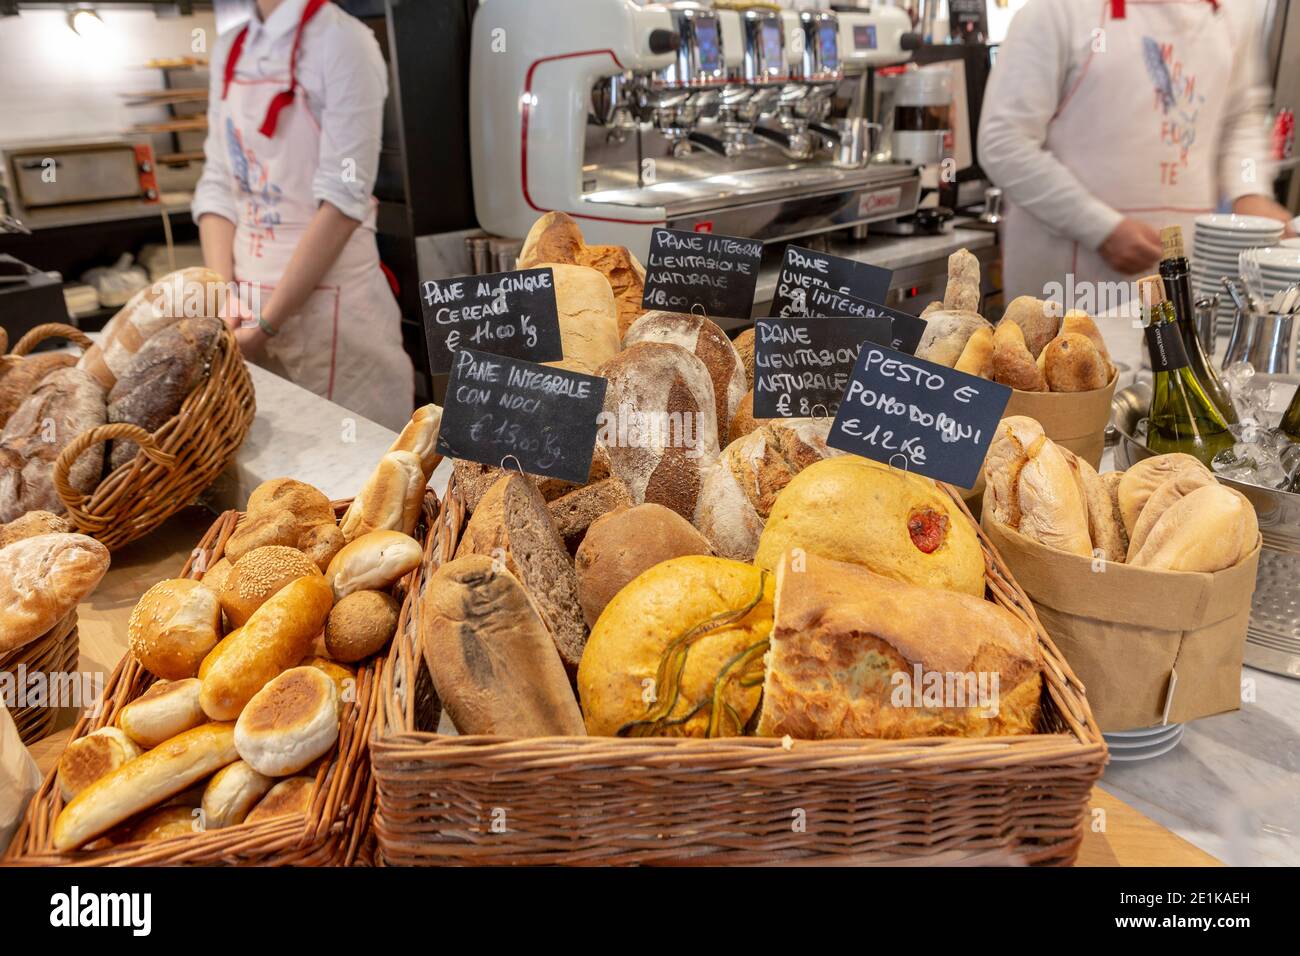 Monteforte bakery store in Rome with bread on counter Stock Photo - Alamy